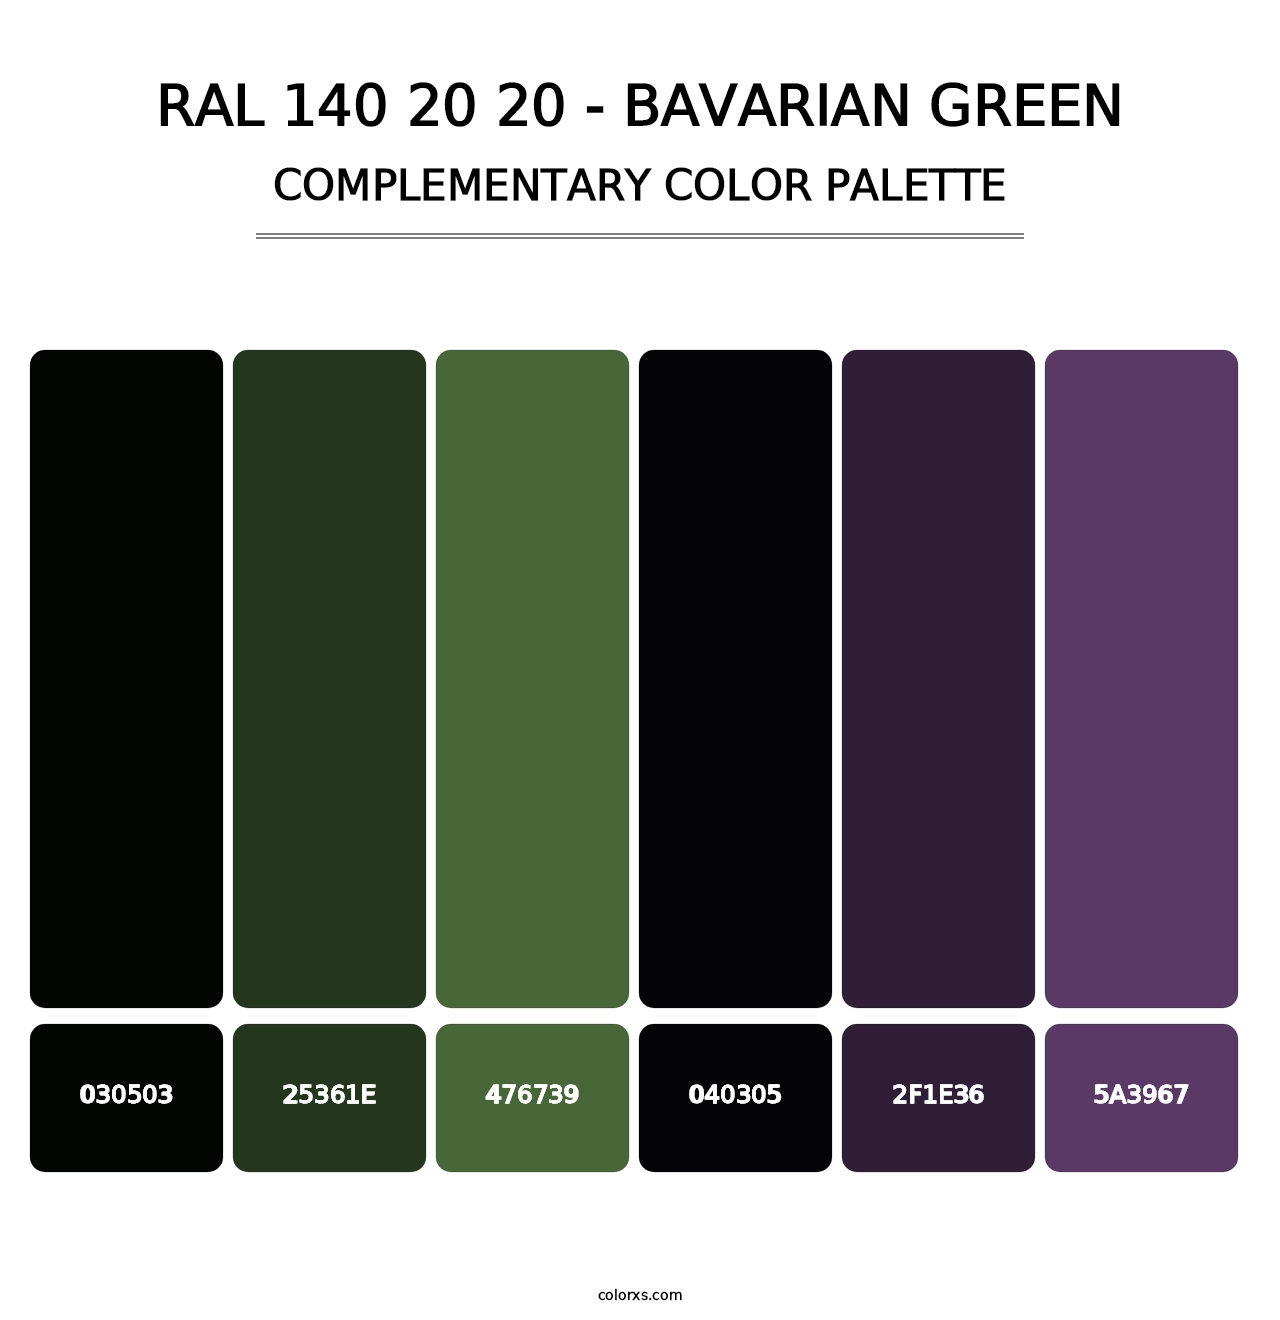 RAL 140 20 20 - Bavarian Green - Complementary Color Palette